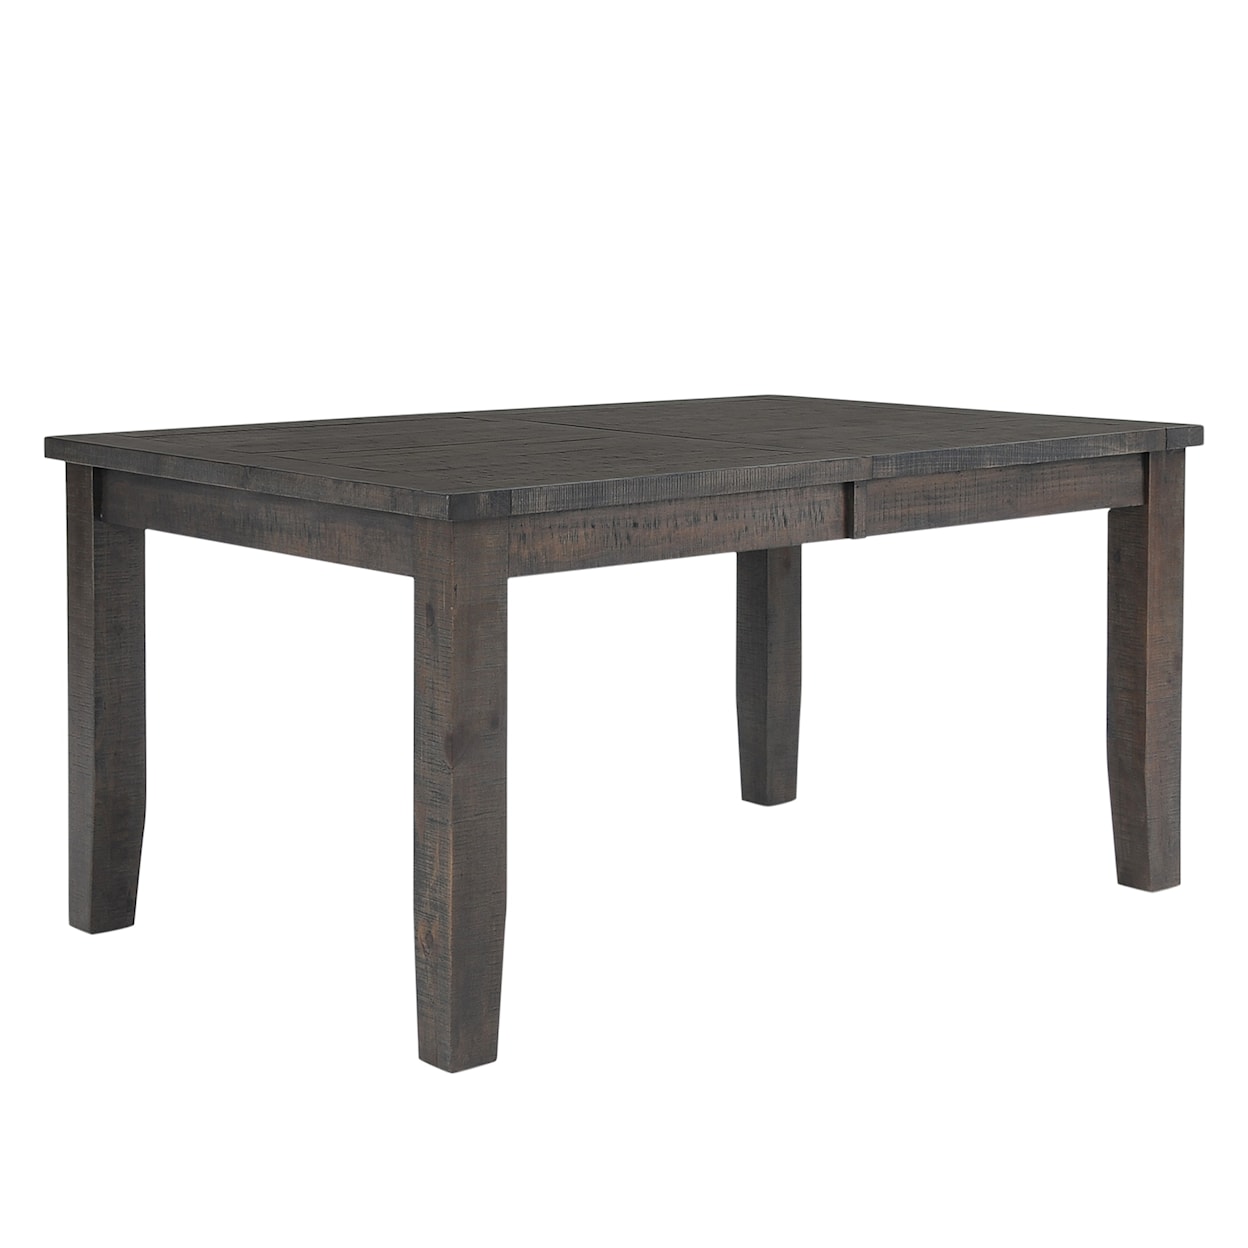 Jofran Willow Creek Extension Dining Table